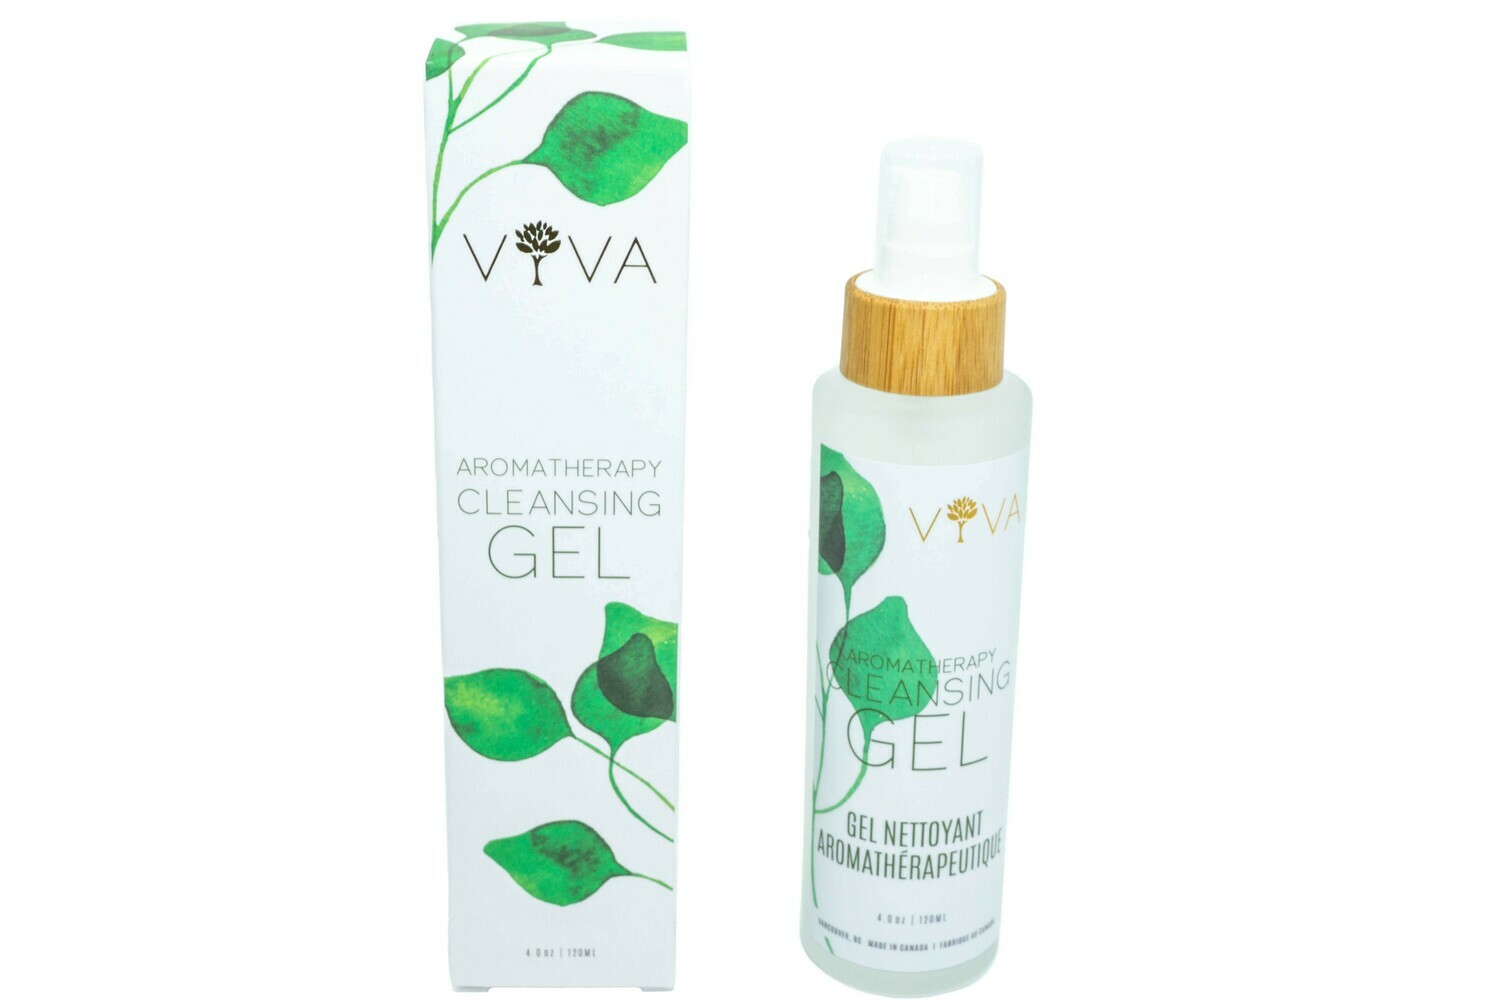 Aromatherapy Cleansing Gel By Viva